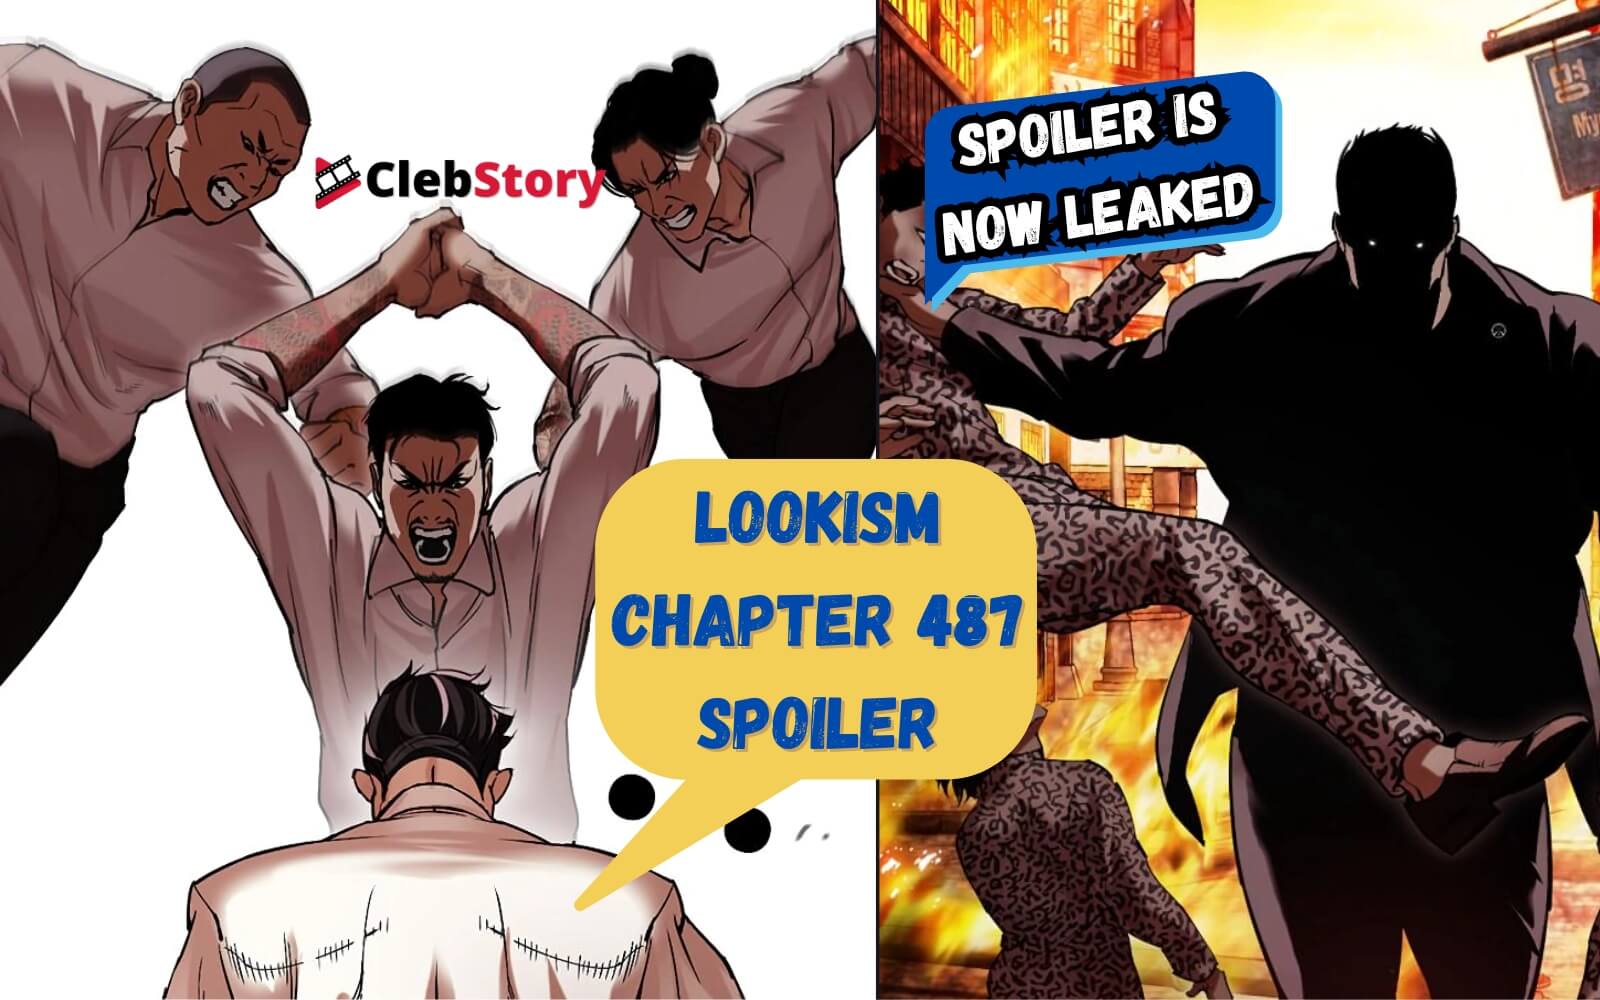 Lookism Chapter 487 title poster final